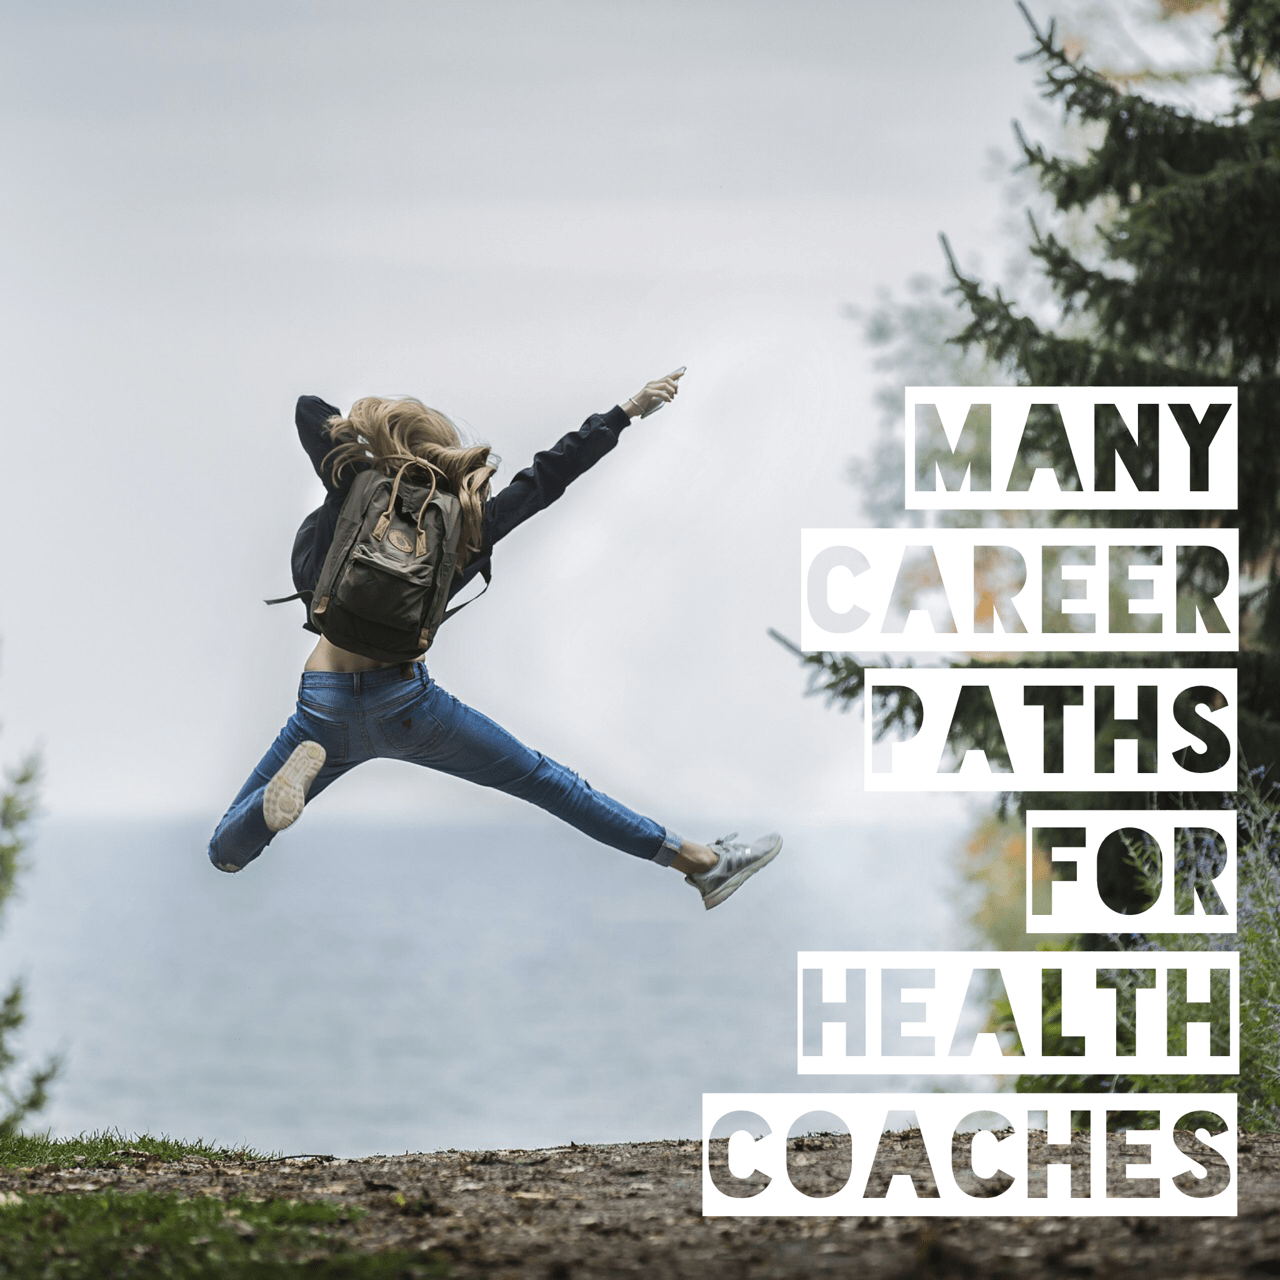 What Kind of Opportunities Exist for Health Coaches?